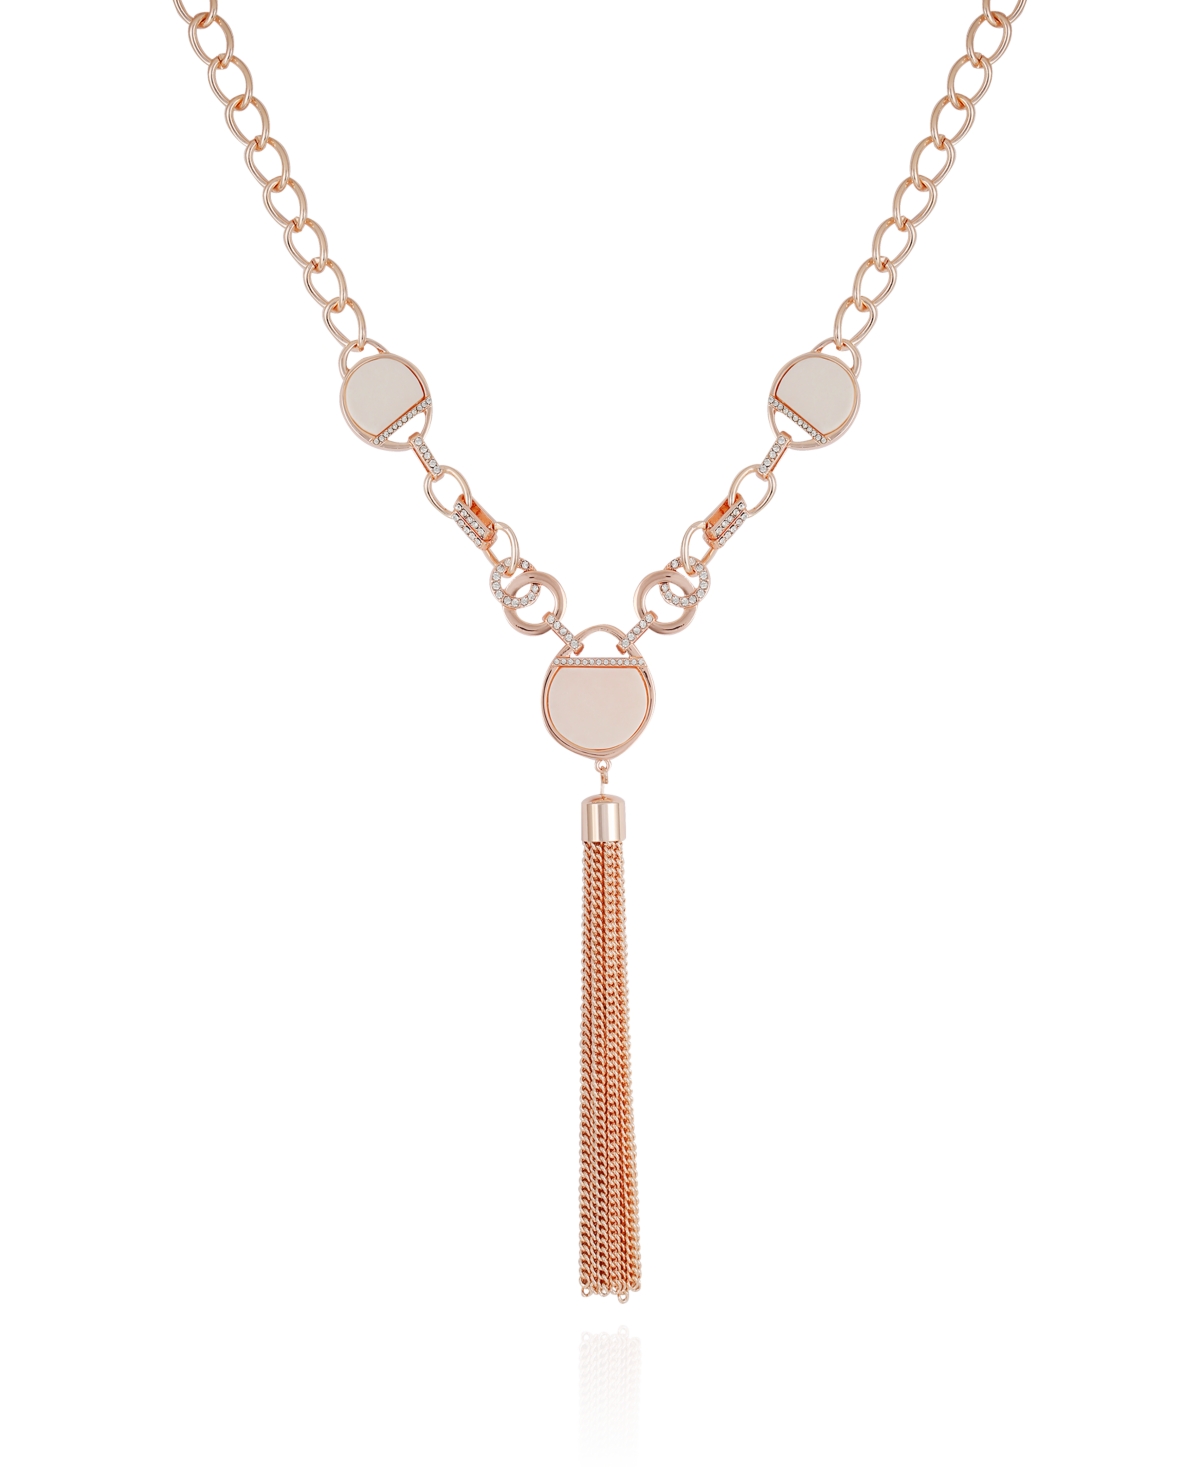 Crystal Stone Tassel Necklace - Rose, Off-White